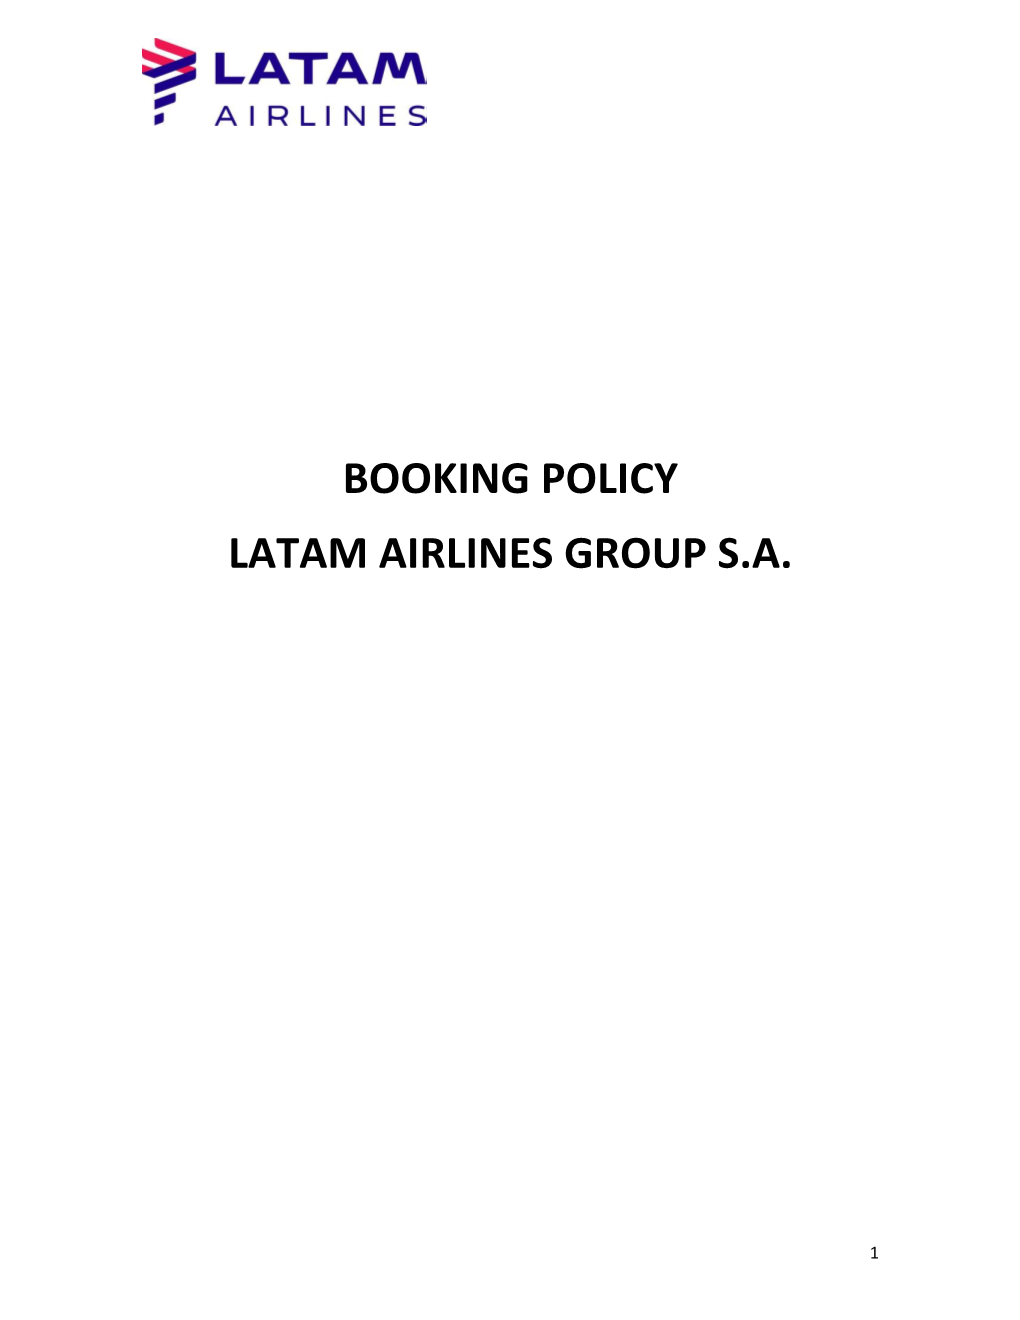 Booking Policy Latam Airlines Group S.A